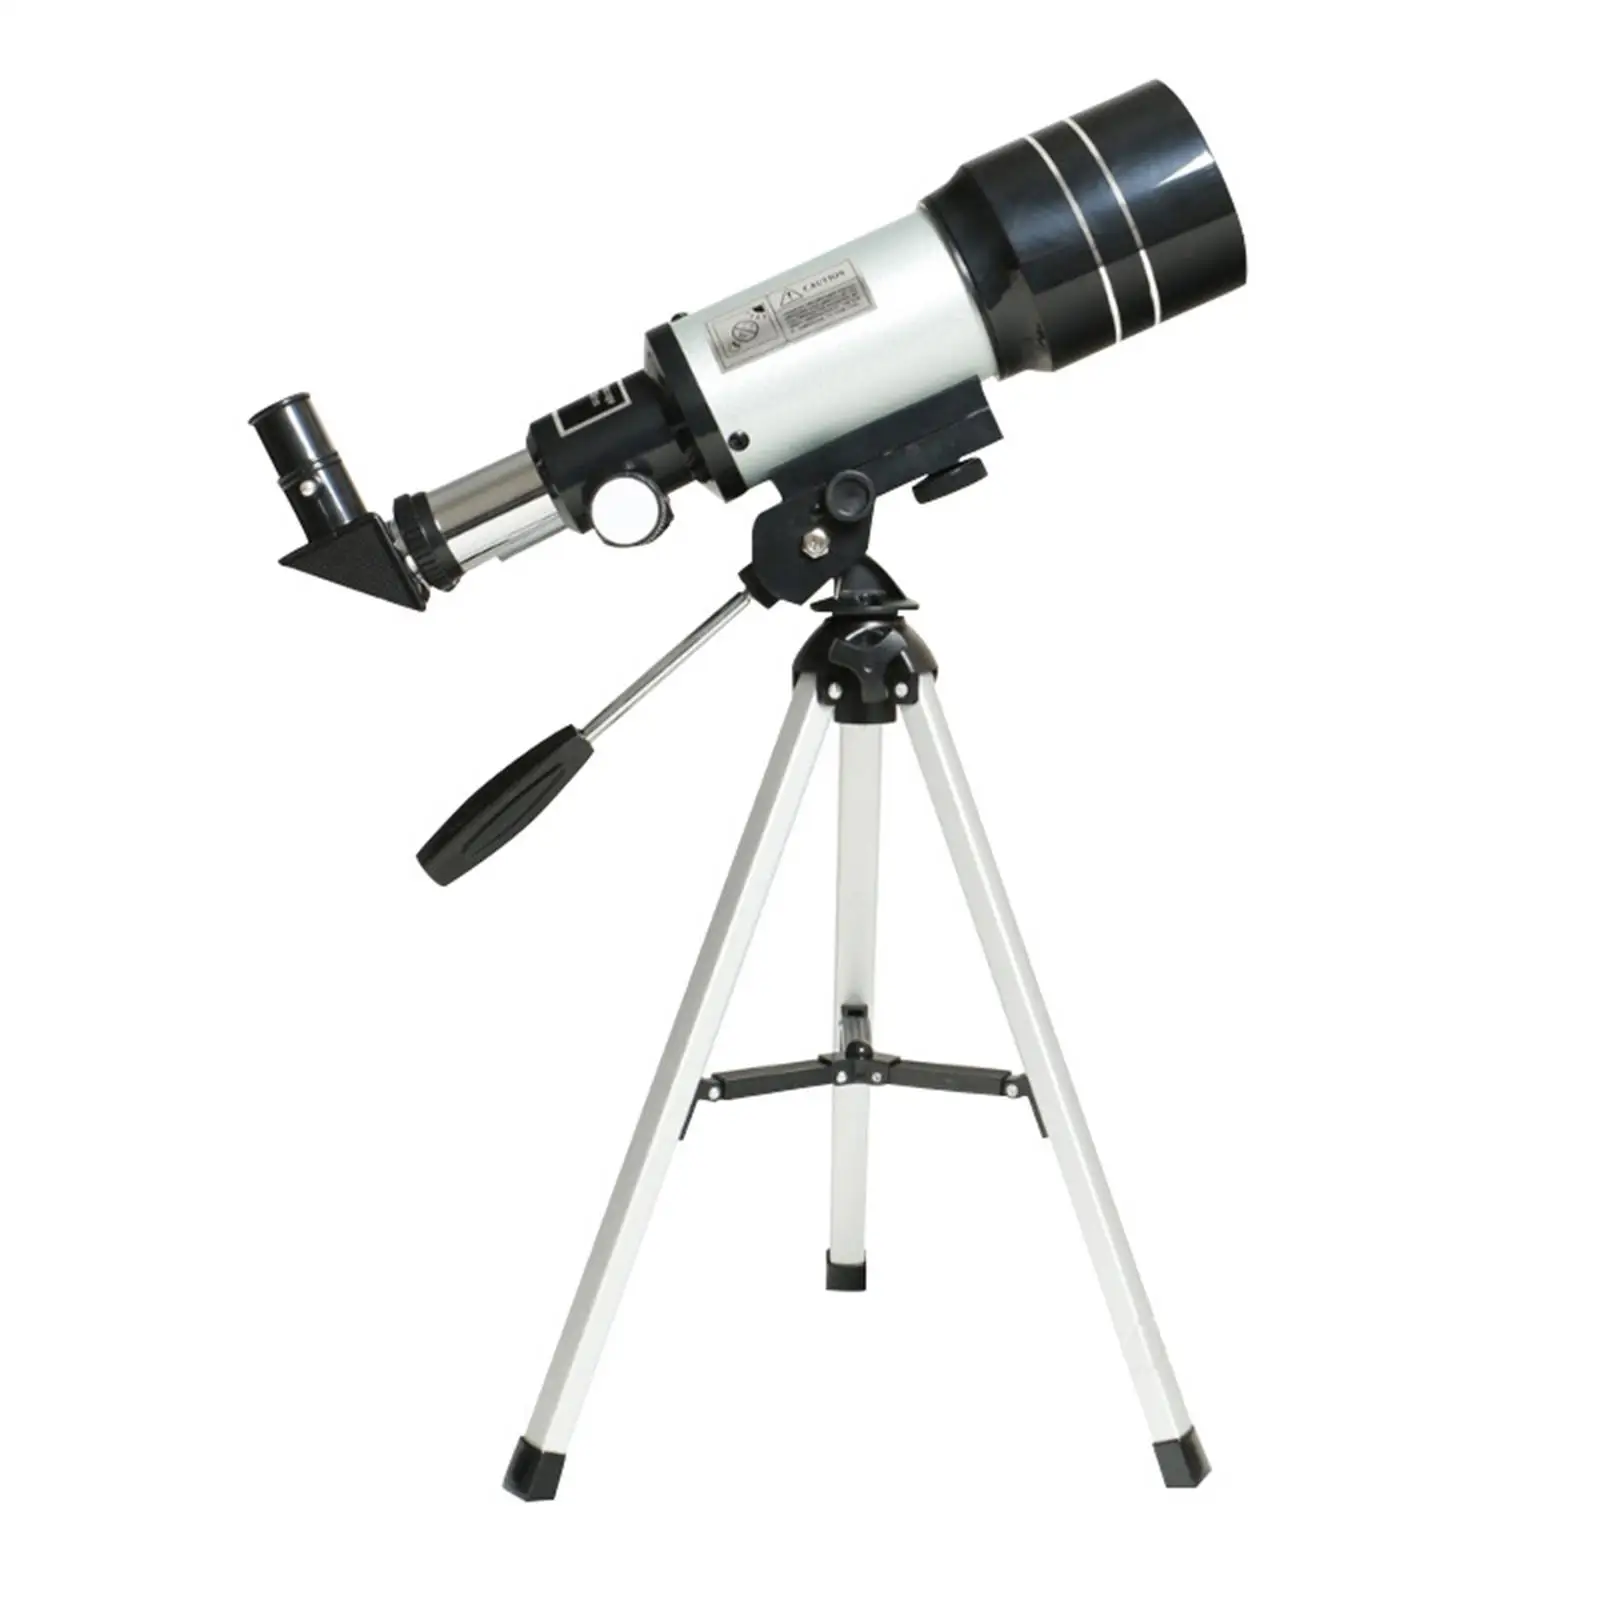 70mm 300mm Telescope with Tripod for Beginners ,to Watch Wildlife and Landscapes